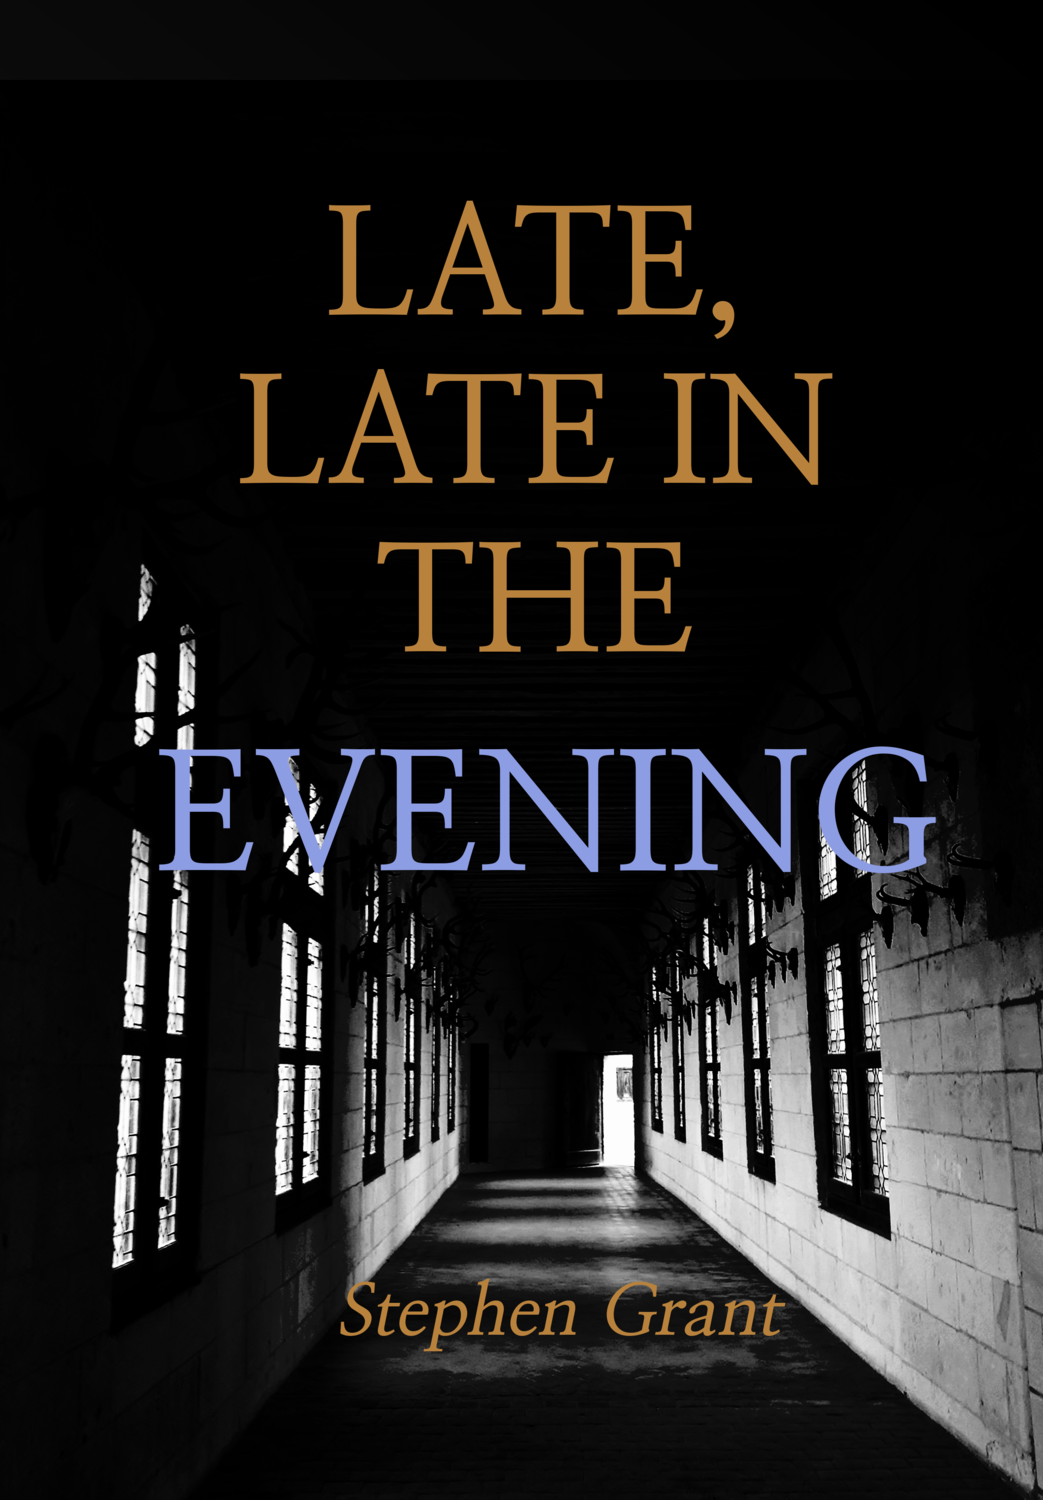 Late, Late in the Evening, by Stephen Grant